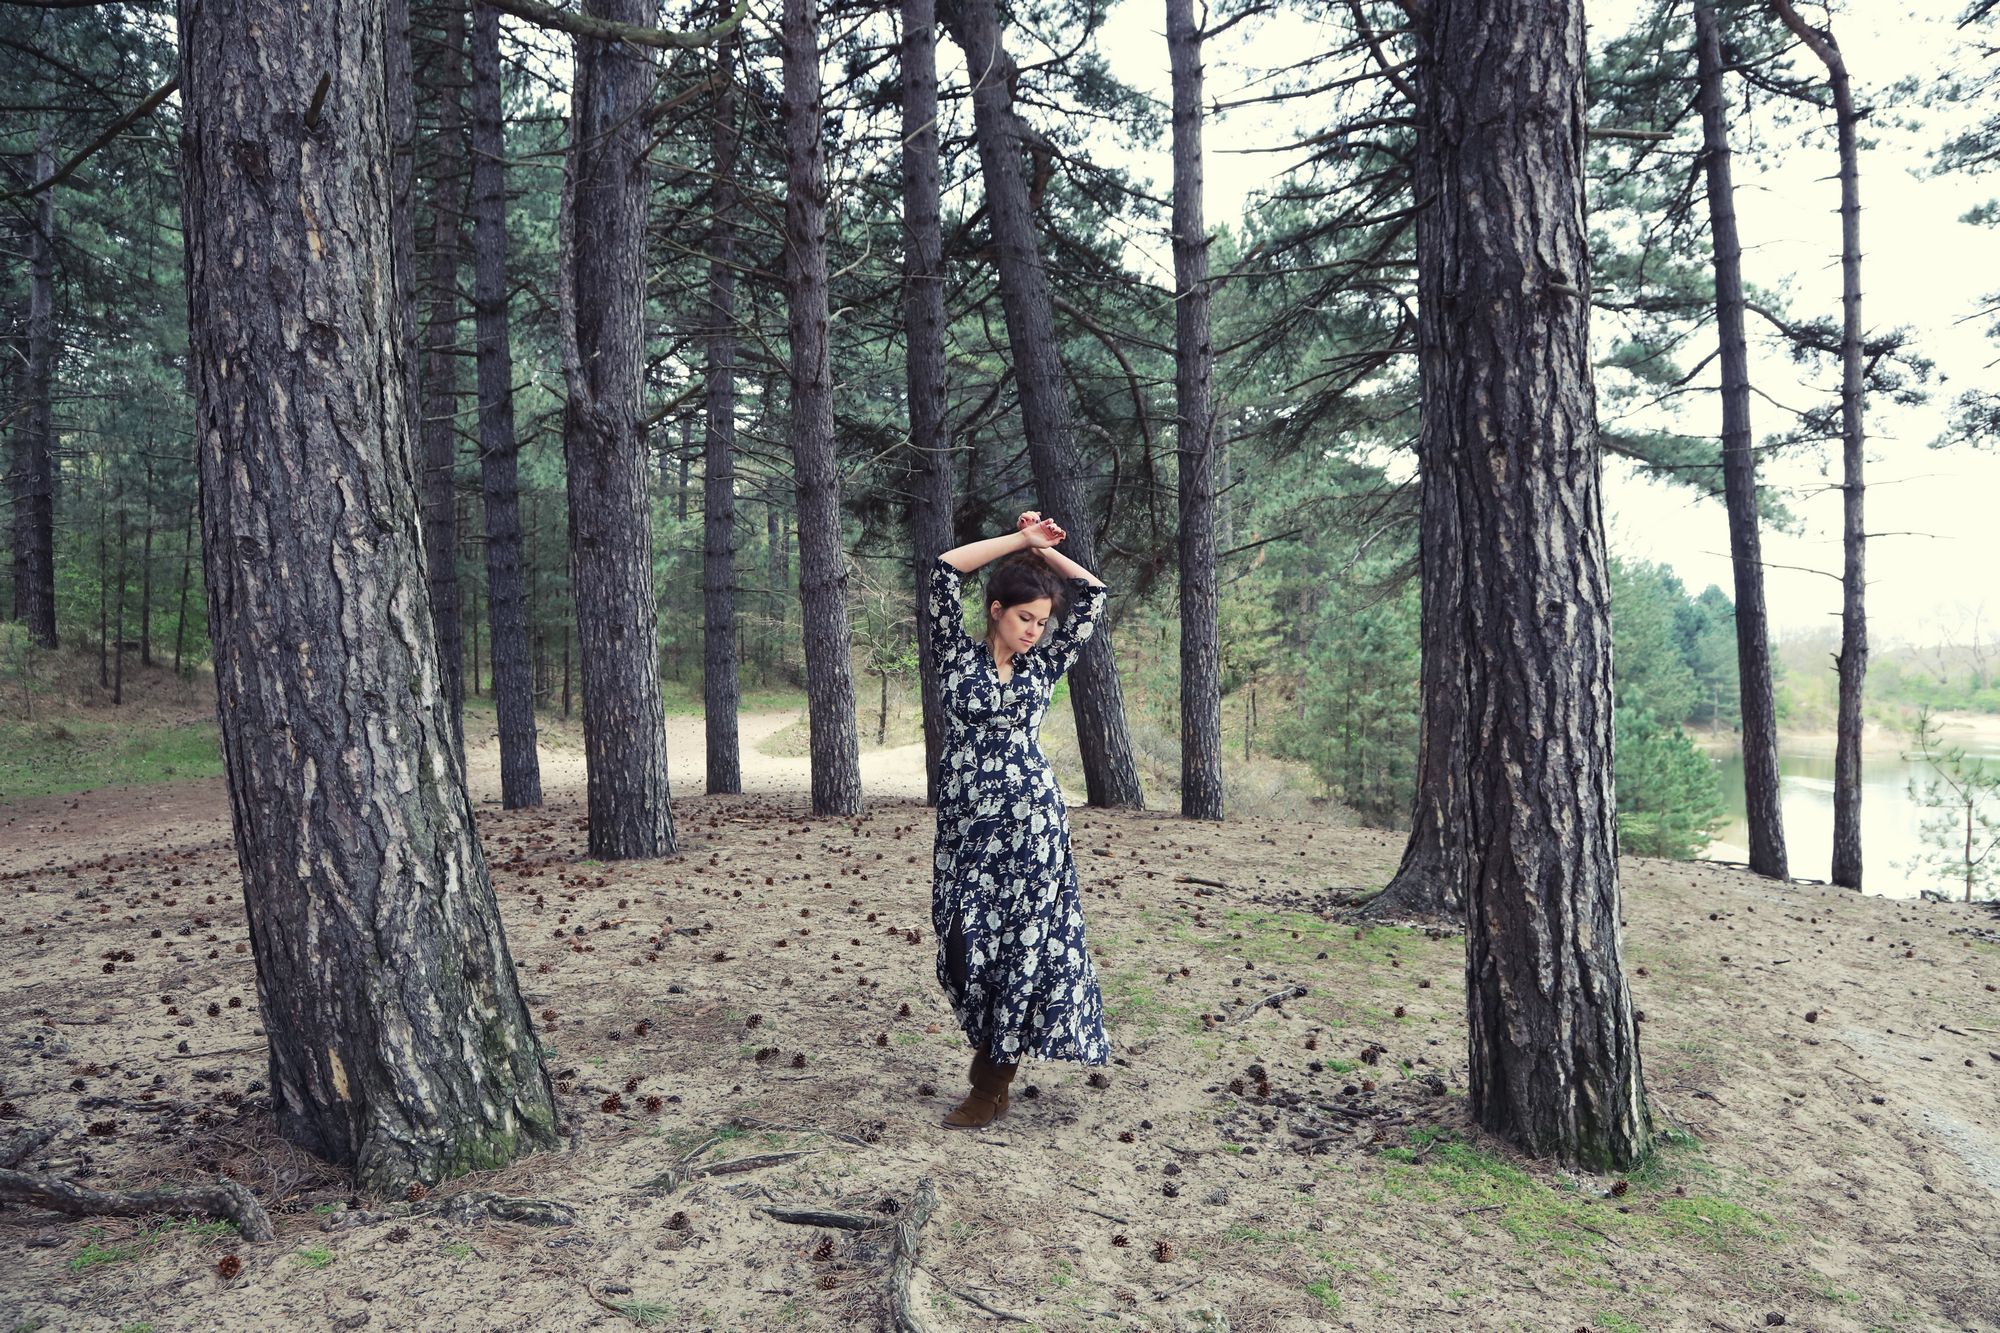 singer songwriter tessa beinfante in the woods photographed by Caroline SIkkenk, flower dress